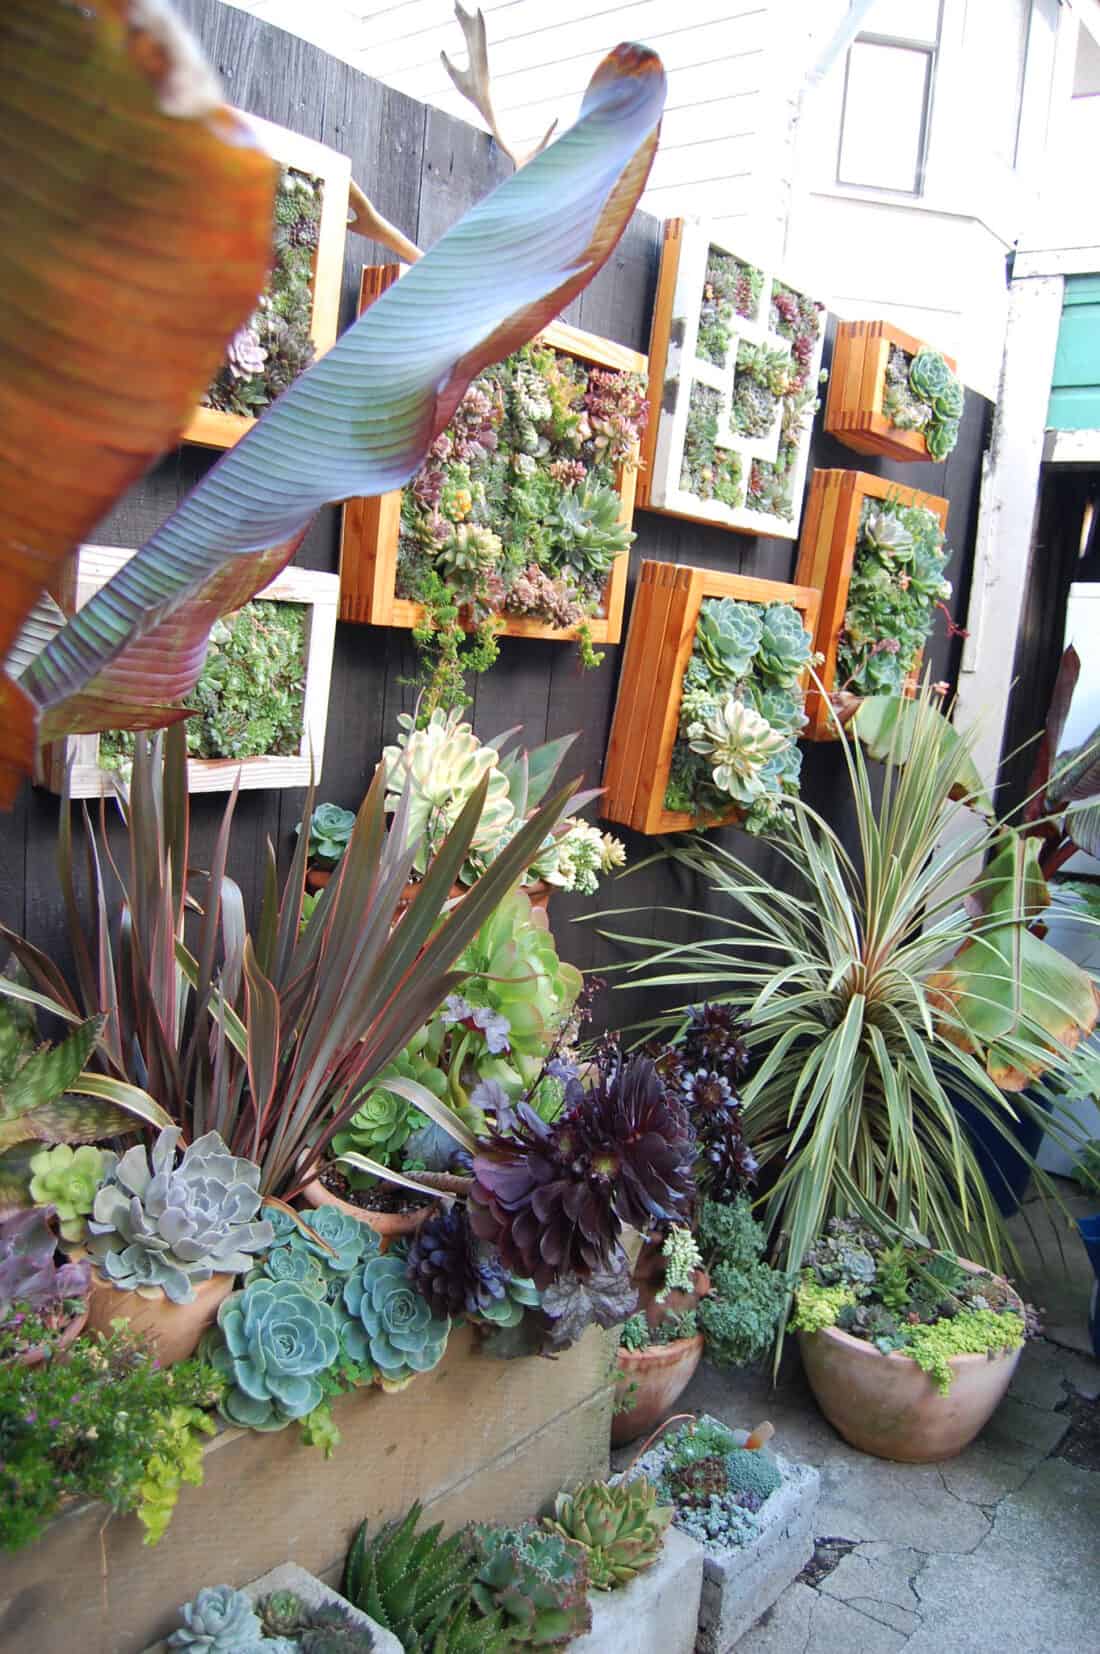 An outdoor succulent garden featuring a variety of succulents and exotic plants in wooden wall-mounted planters and clay pots, creating a lush, green space against a dark wooden fence.